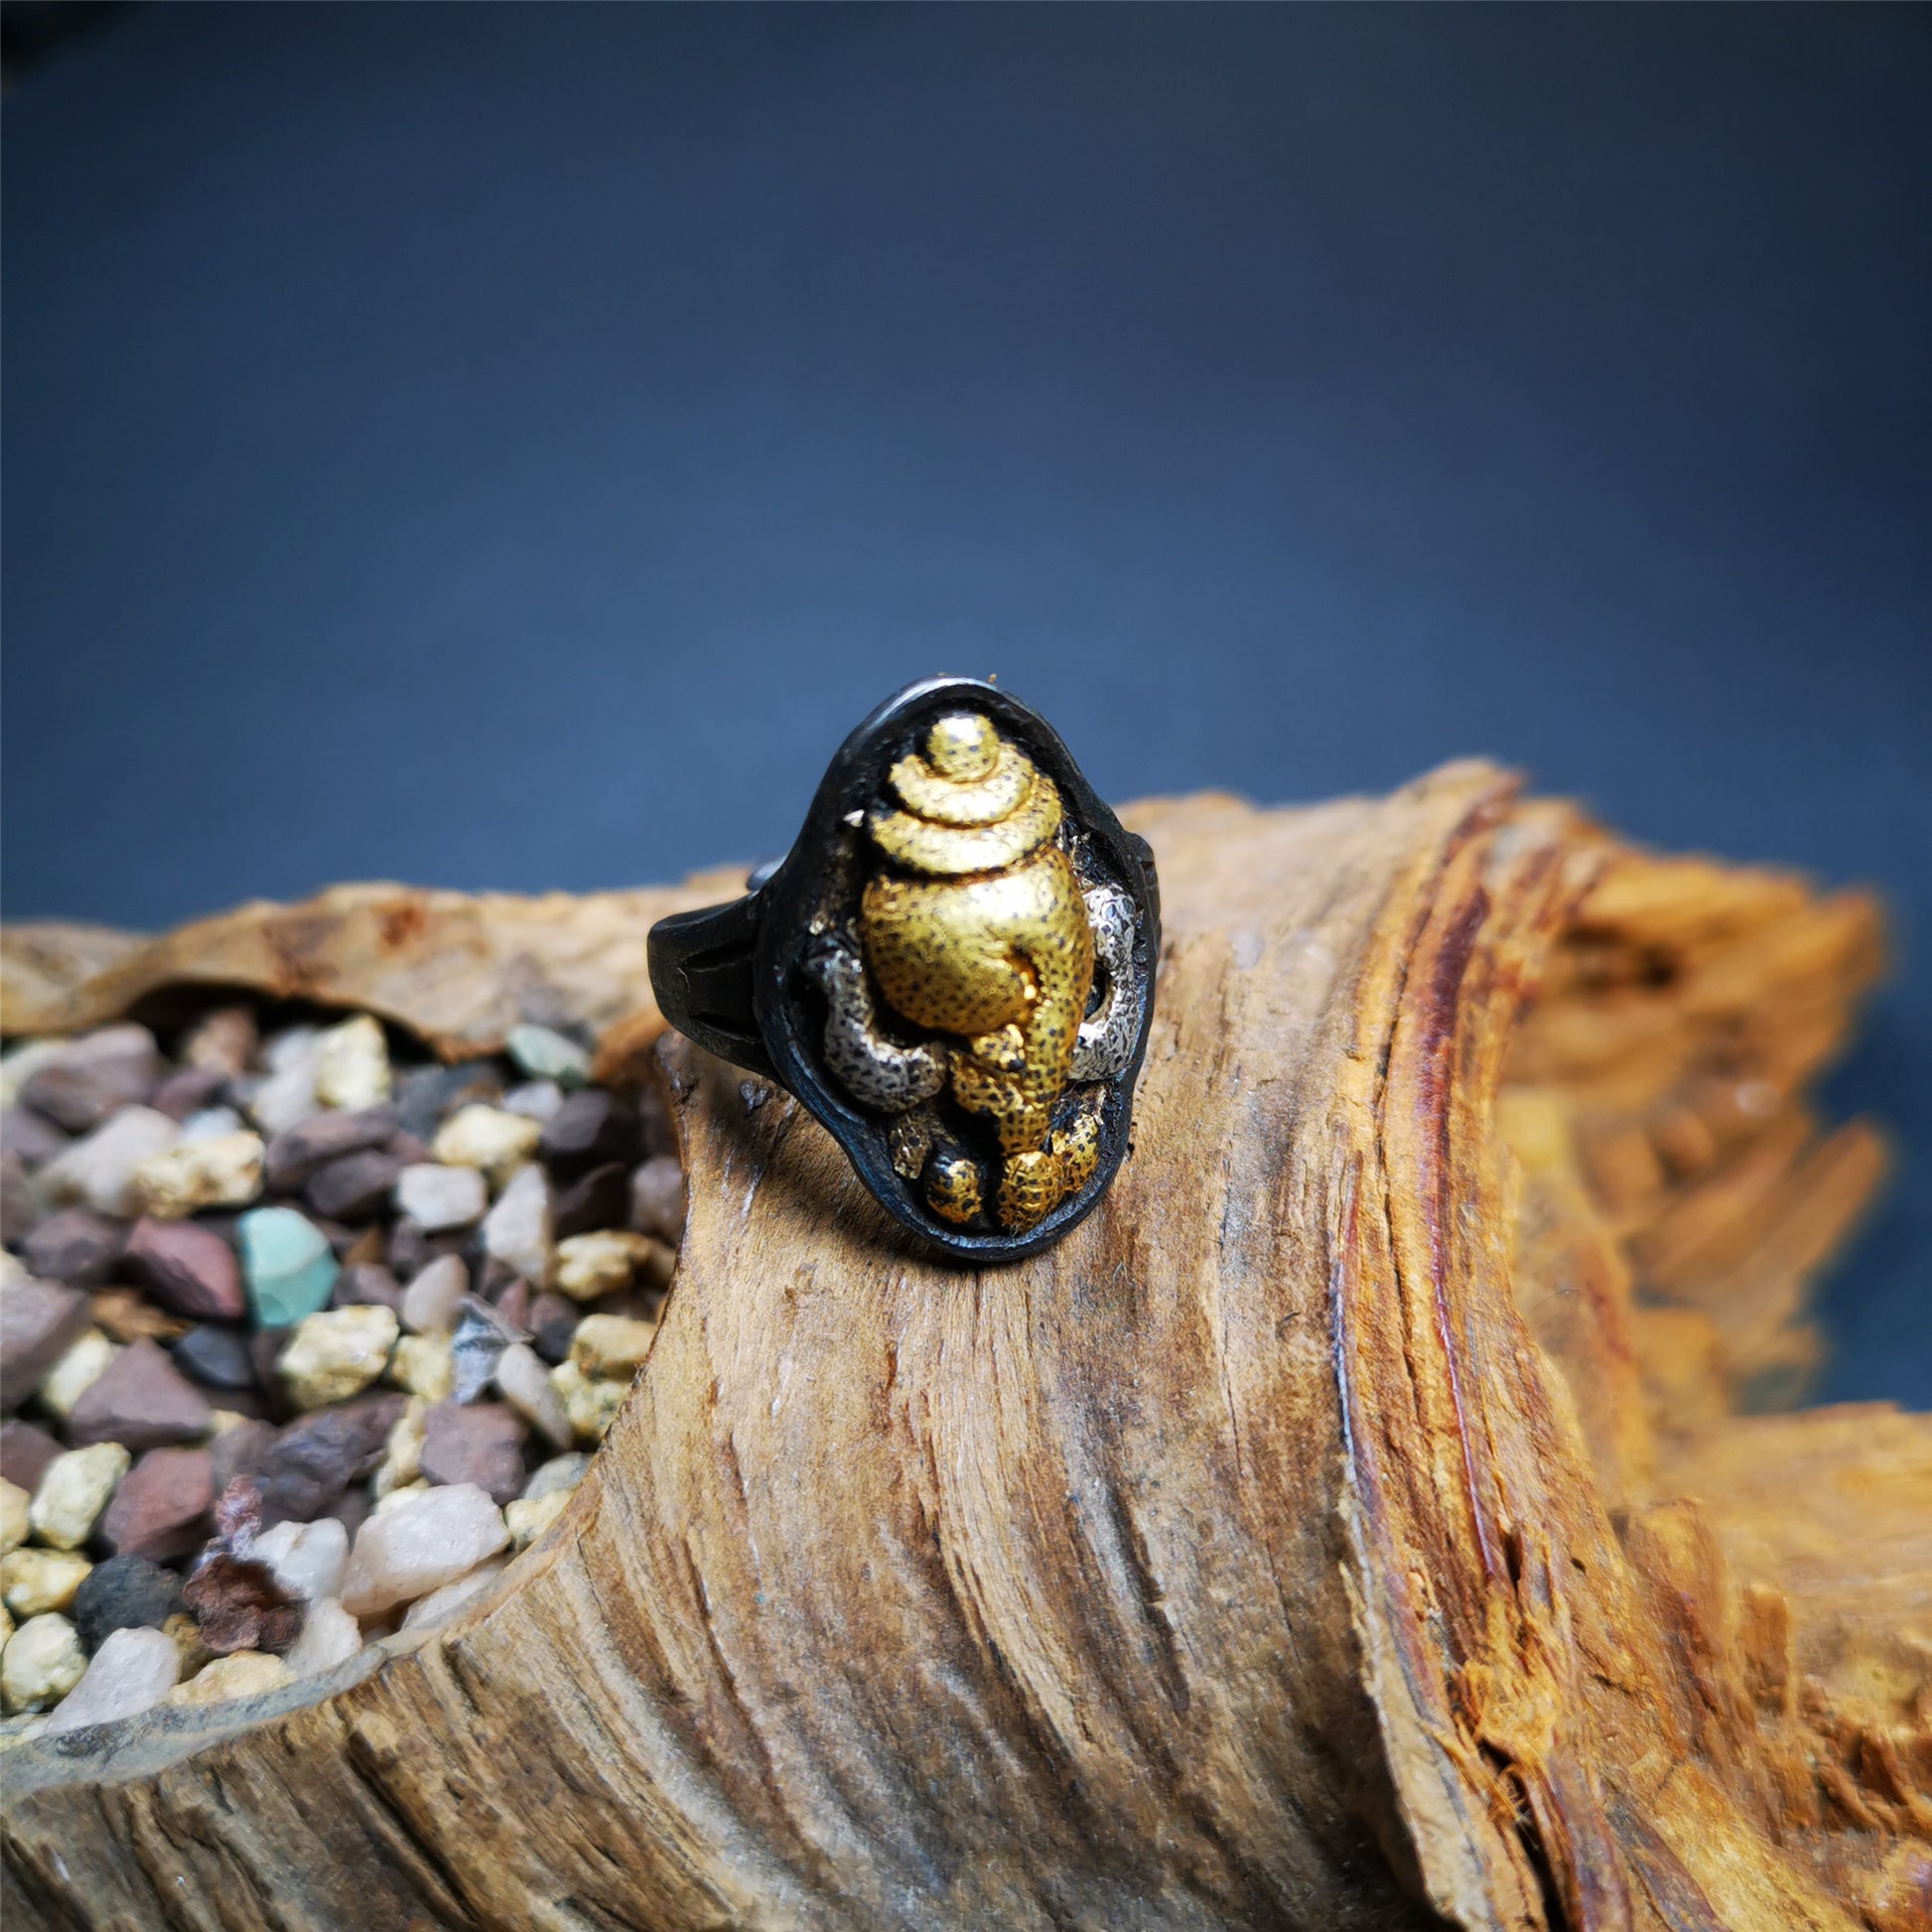 Gandhanra Unique Handcrafted Tibetan Buddhist Conch Ring,Made of Pure Gold Filled and Silver Filled,Protection Jewelry,0.87"